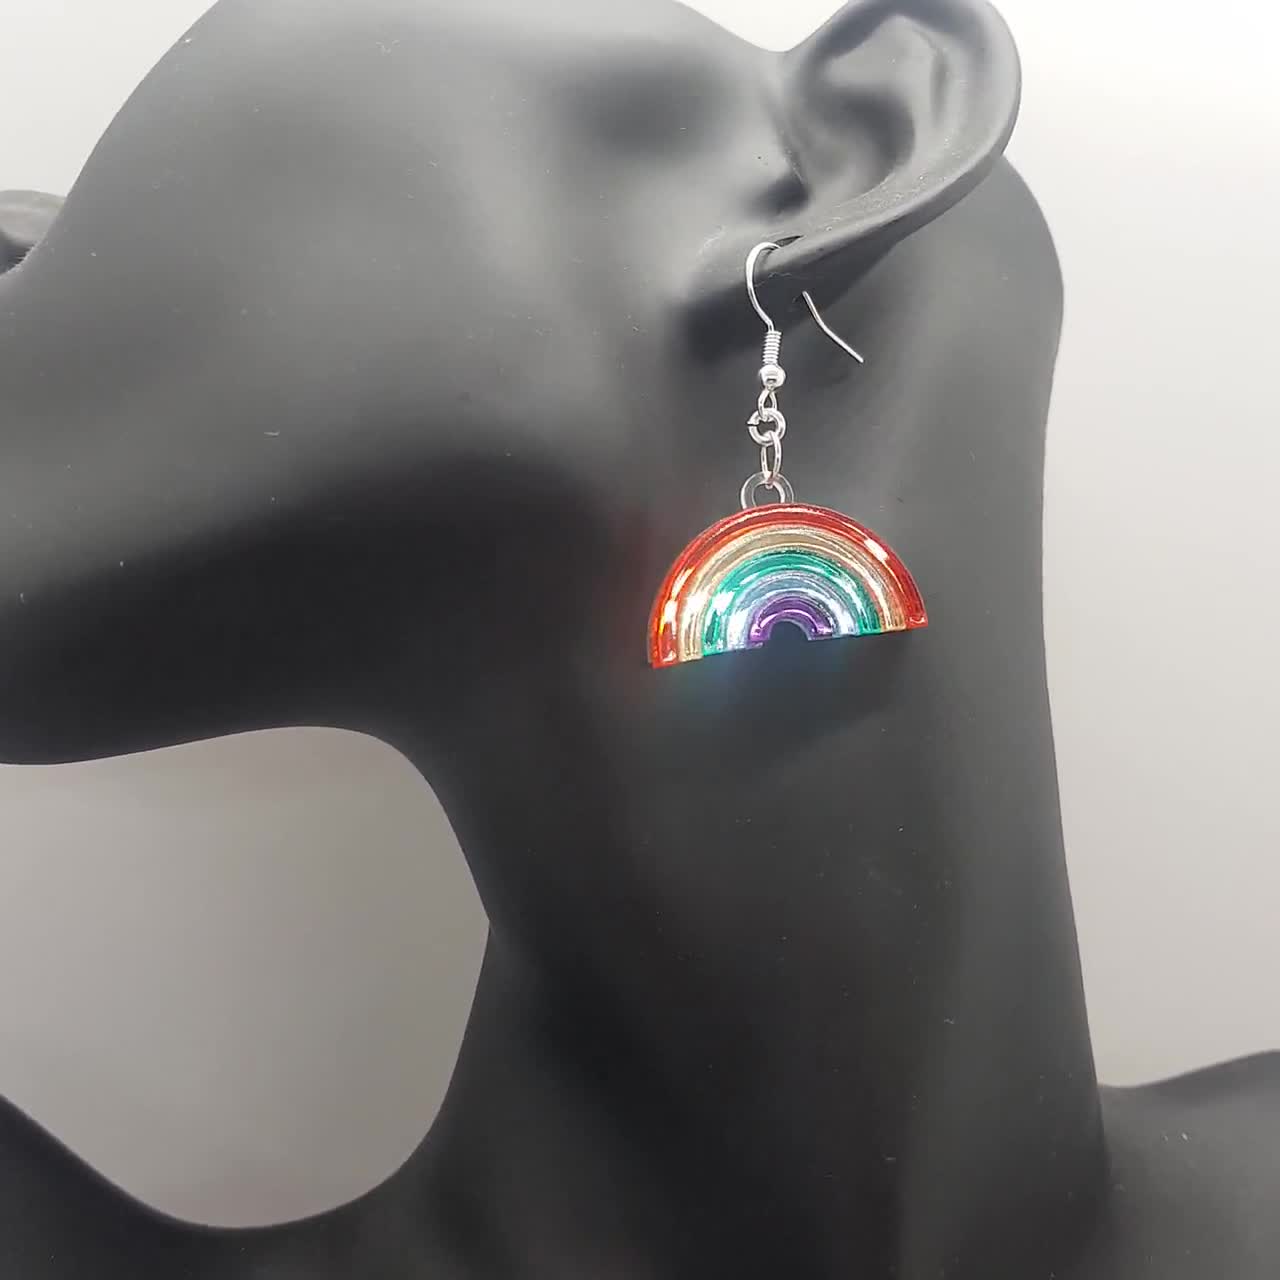 Shooting Star Rainbow Earrings  Gay Pride Flag Laser Cut Acrylic Jewelry  Colorful Lesbian Gay Earrings  Trans Pride Queer Gift for Her